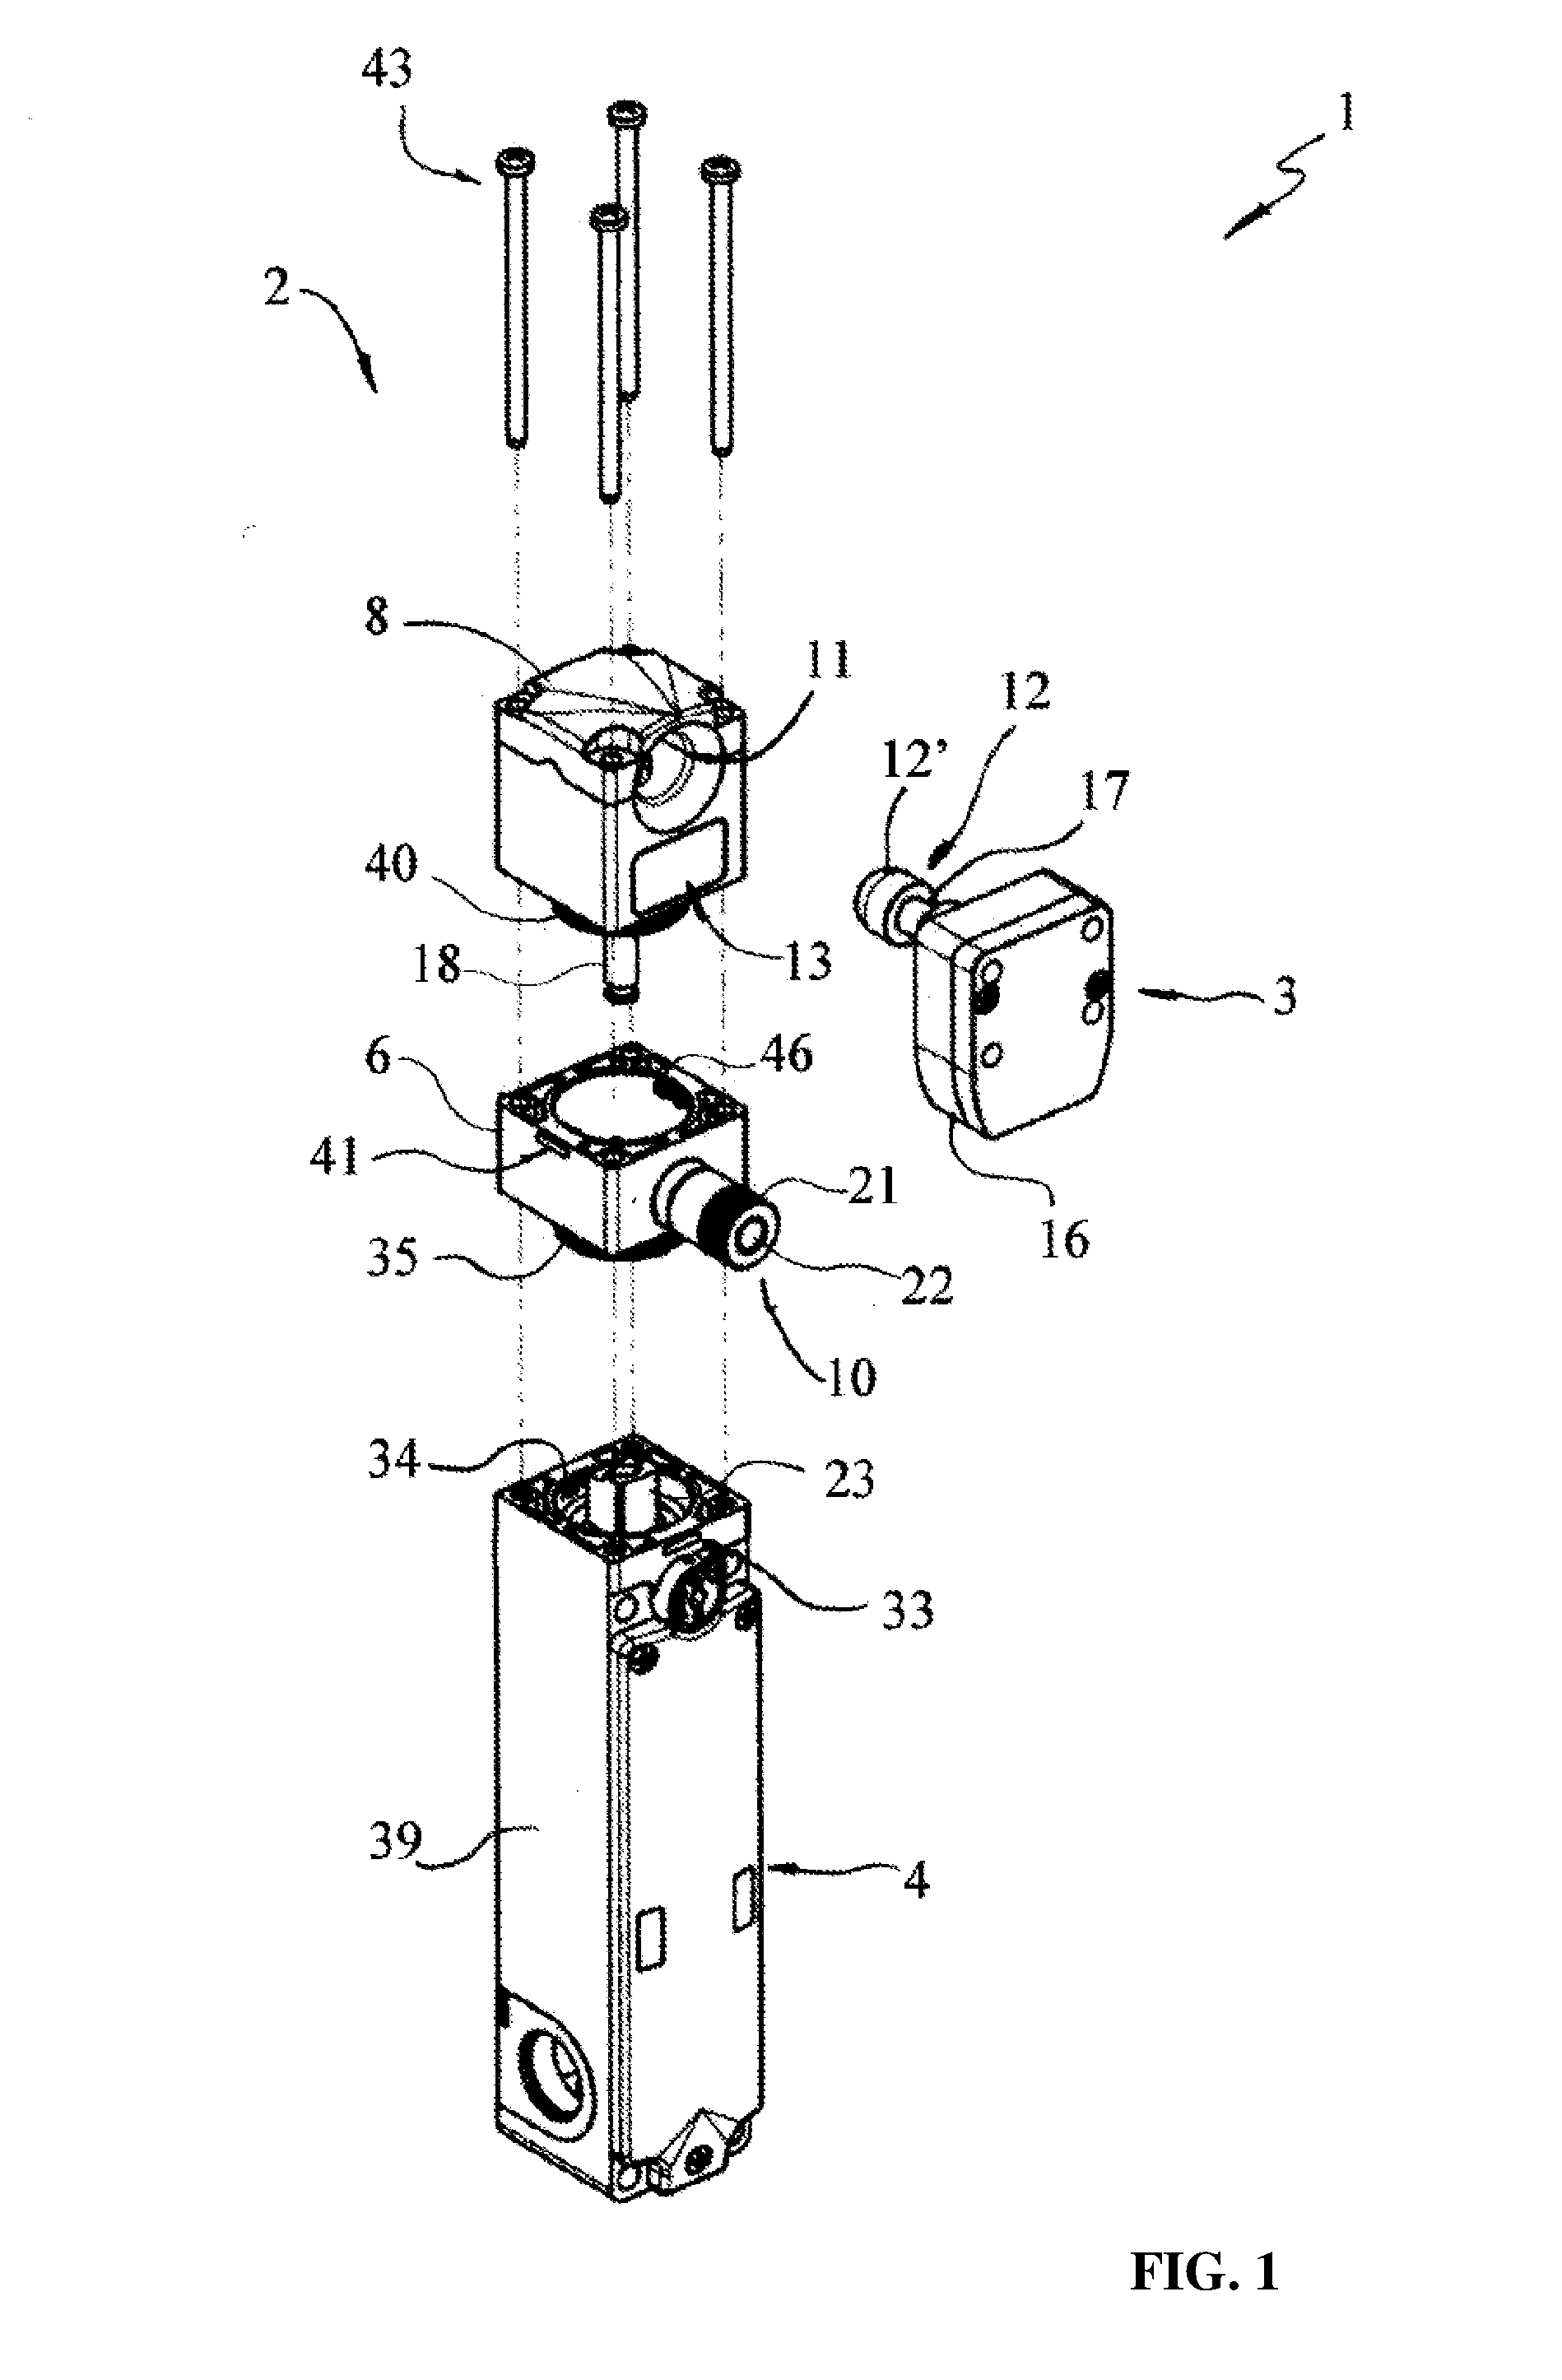 Hand-operated safety switch with time delay